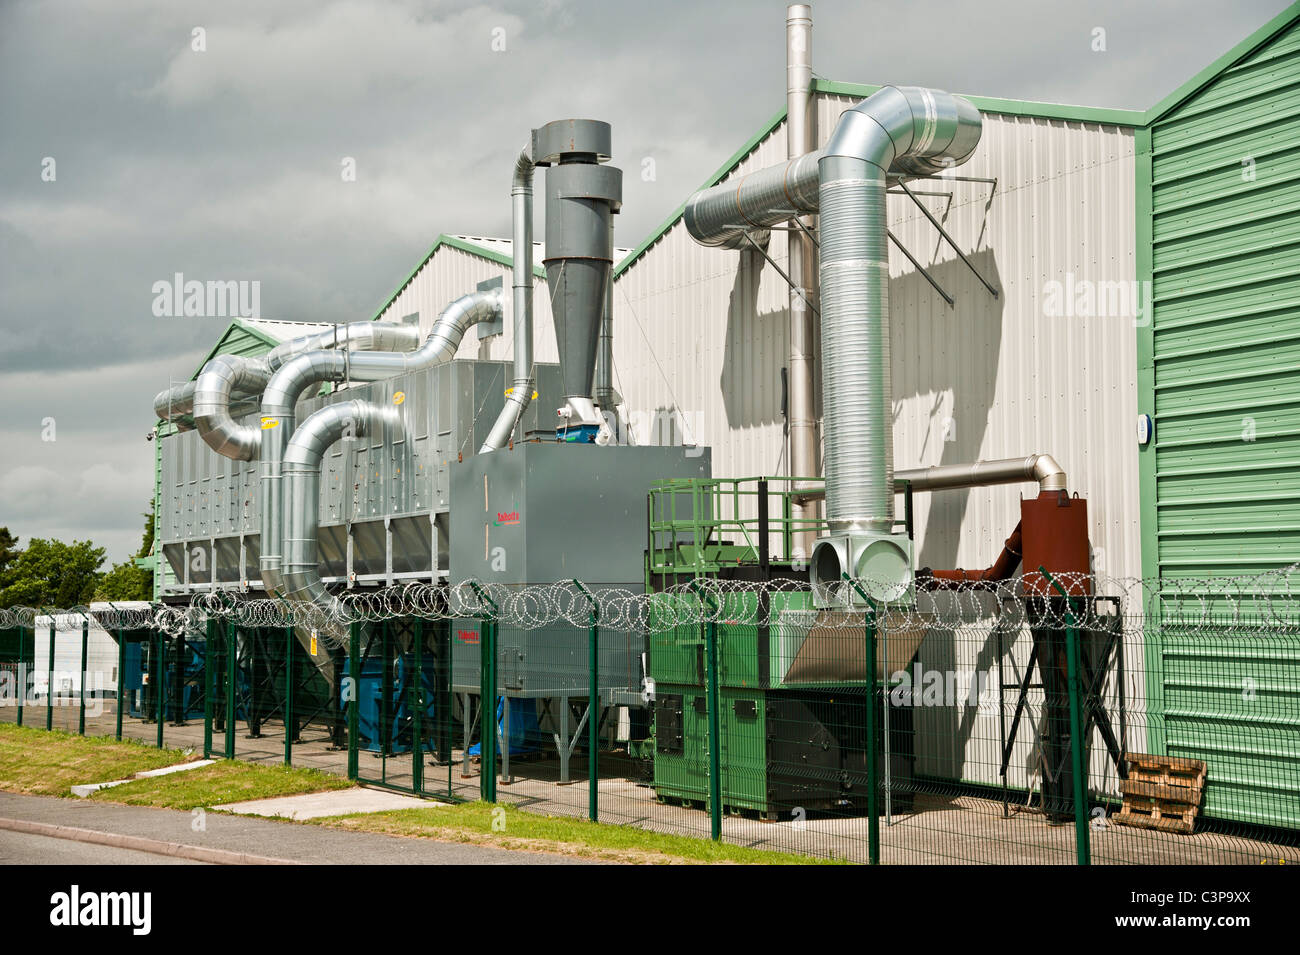 A Talbott's biomass heating and energy system using wood waste at a commercial furniture makers' factory UK Stock Photo